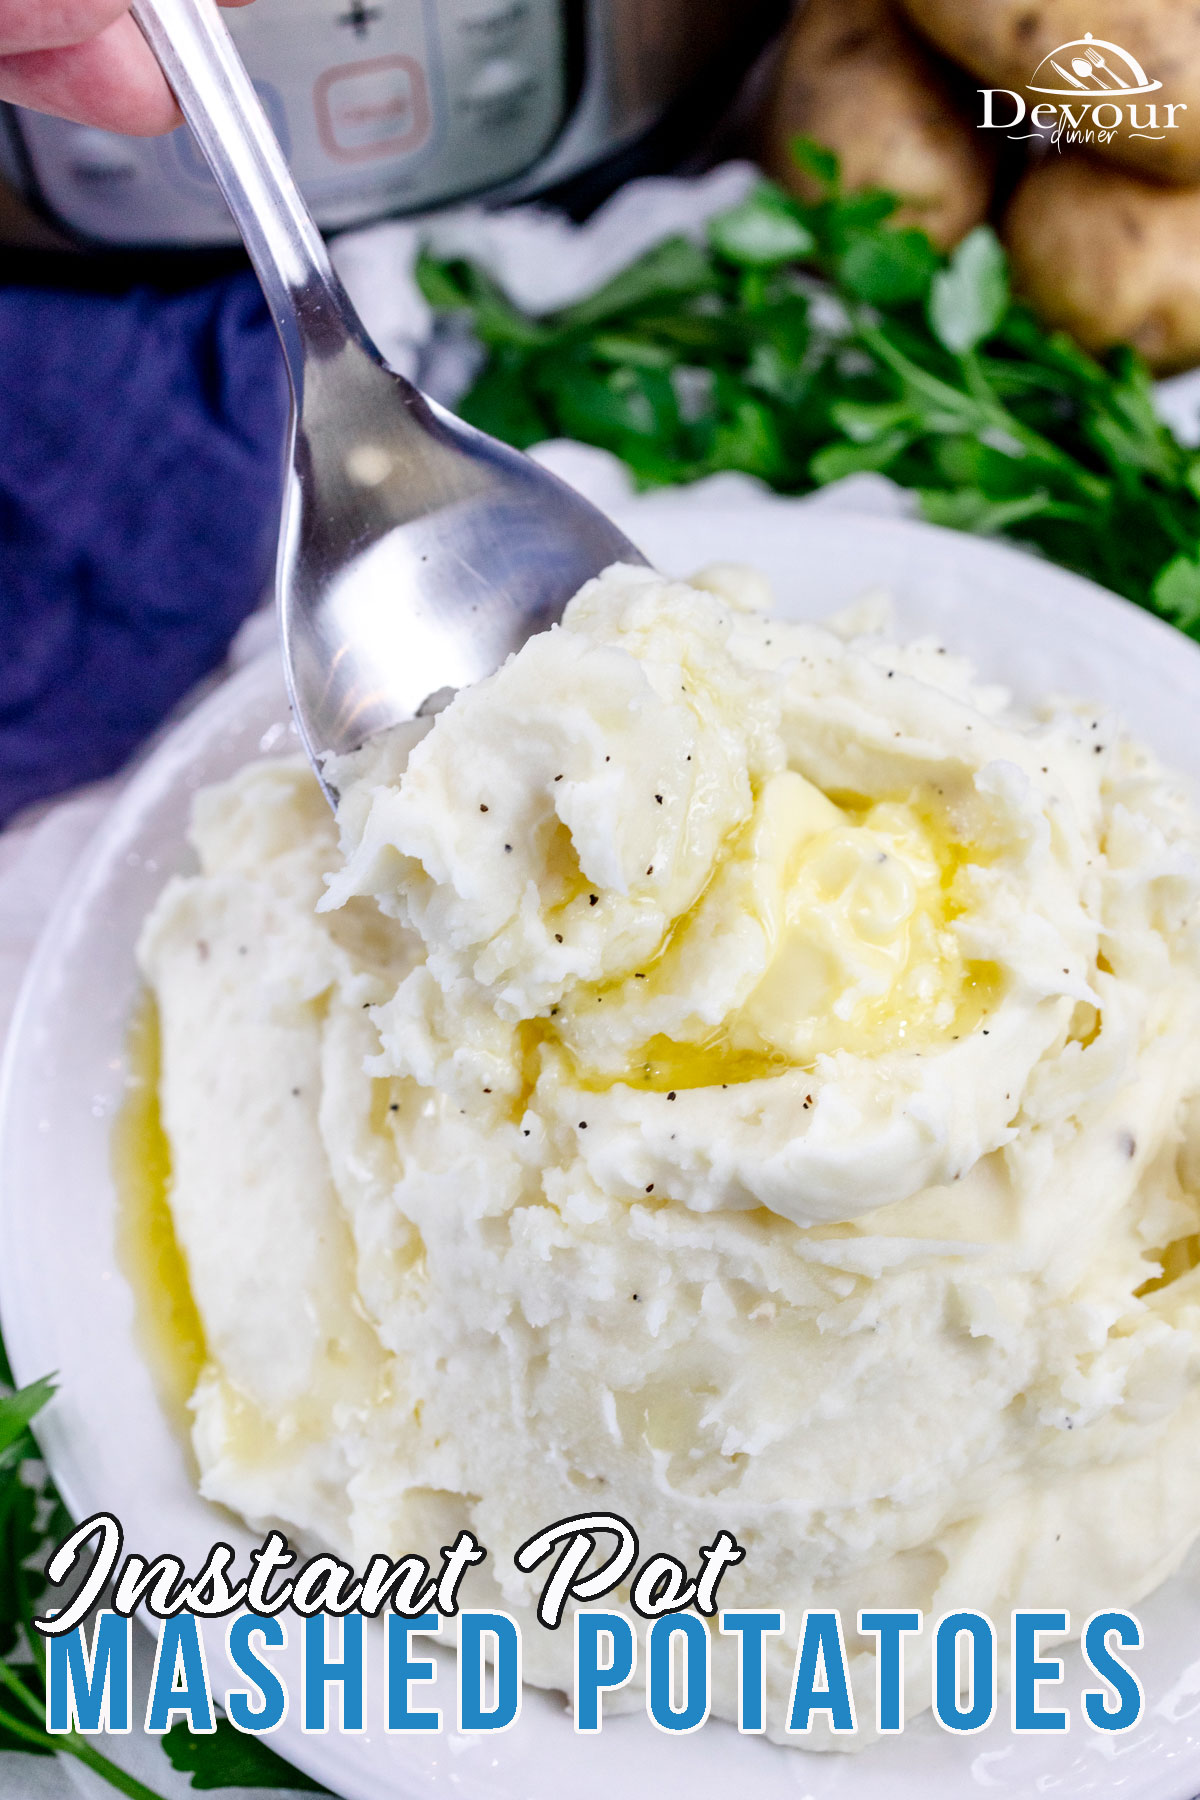 These Instant Pot Mashed Potatoes will be on your table in less than half an hour! They're made super creamy, rich, and delicious with softened cream cheese, salted butter, and freshly minced garlic. It's such an easy recipe that you'll wonder why you didn't try it before.